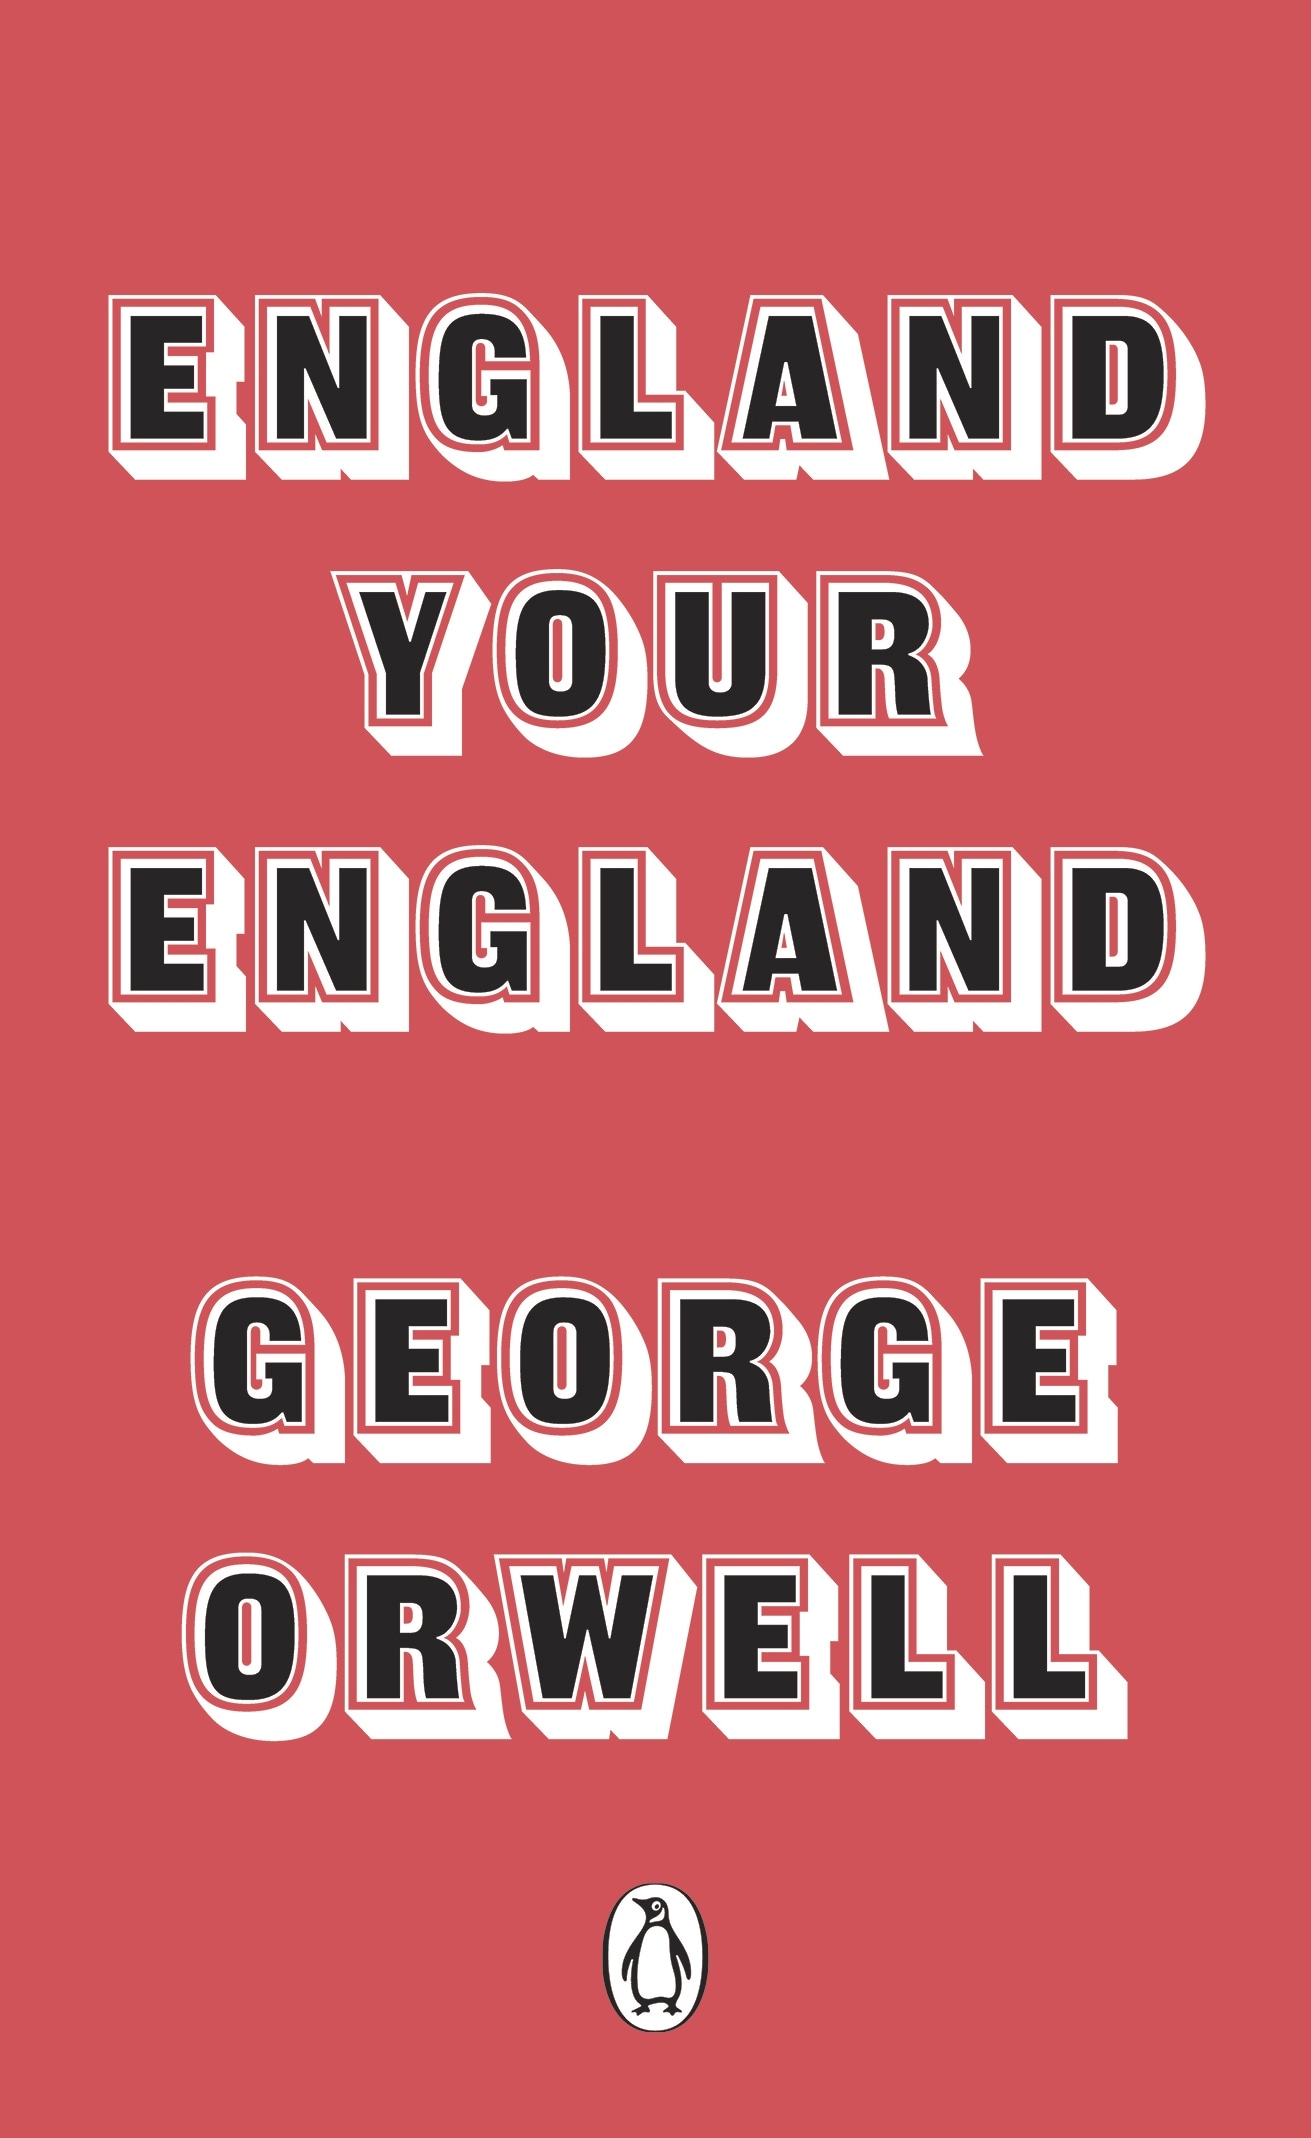 Book “England Your England” by George Orwell — March 30, 2017